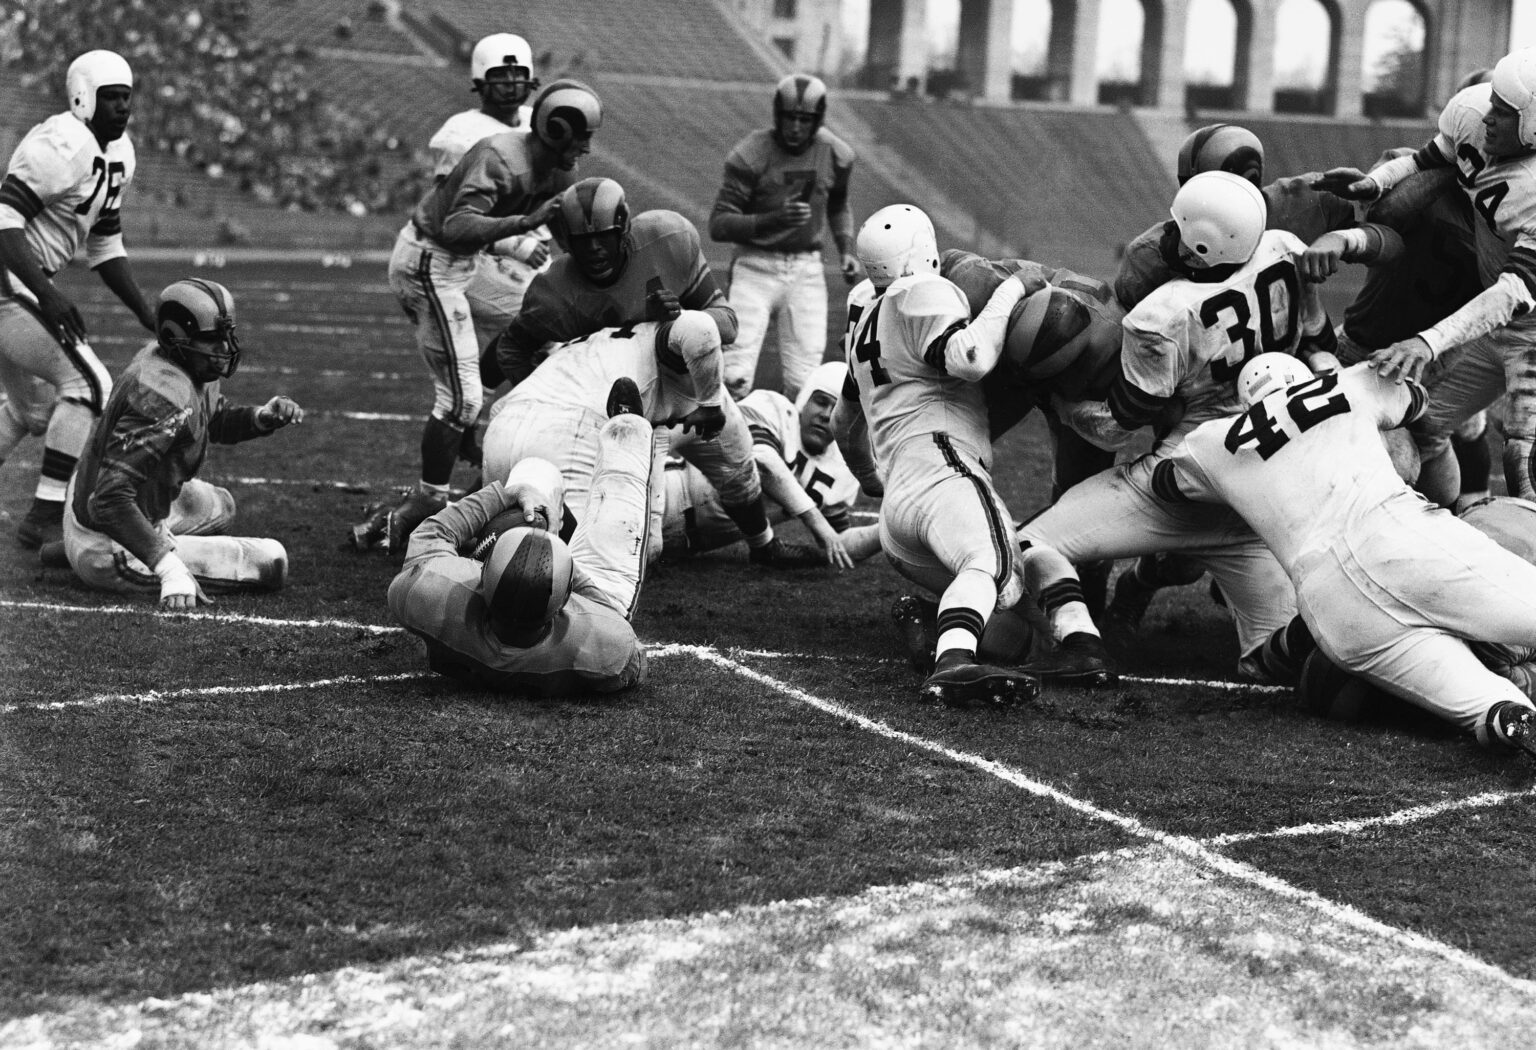 When was the NFL founded? The history and original nfl teams